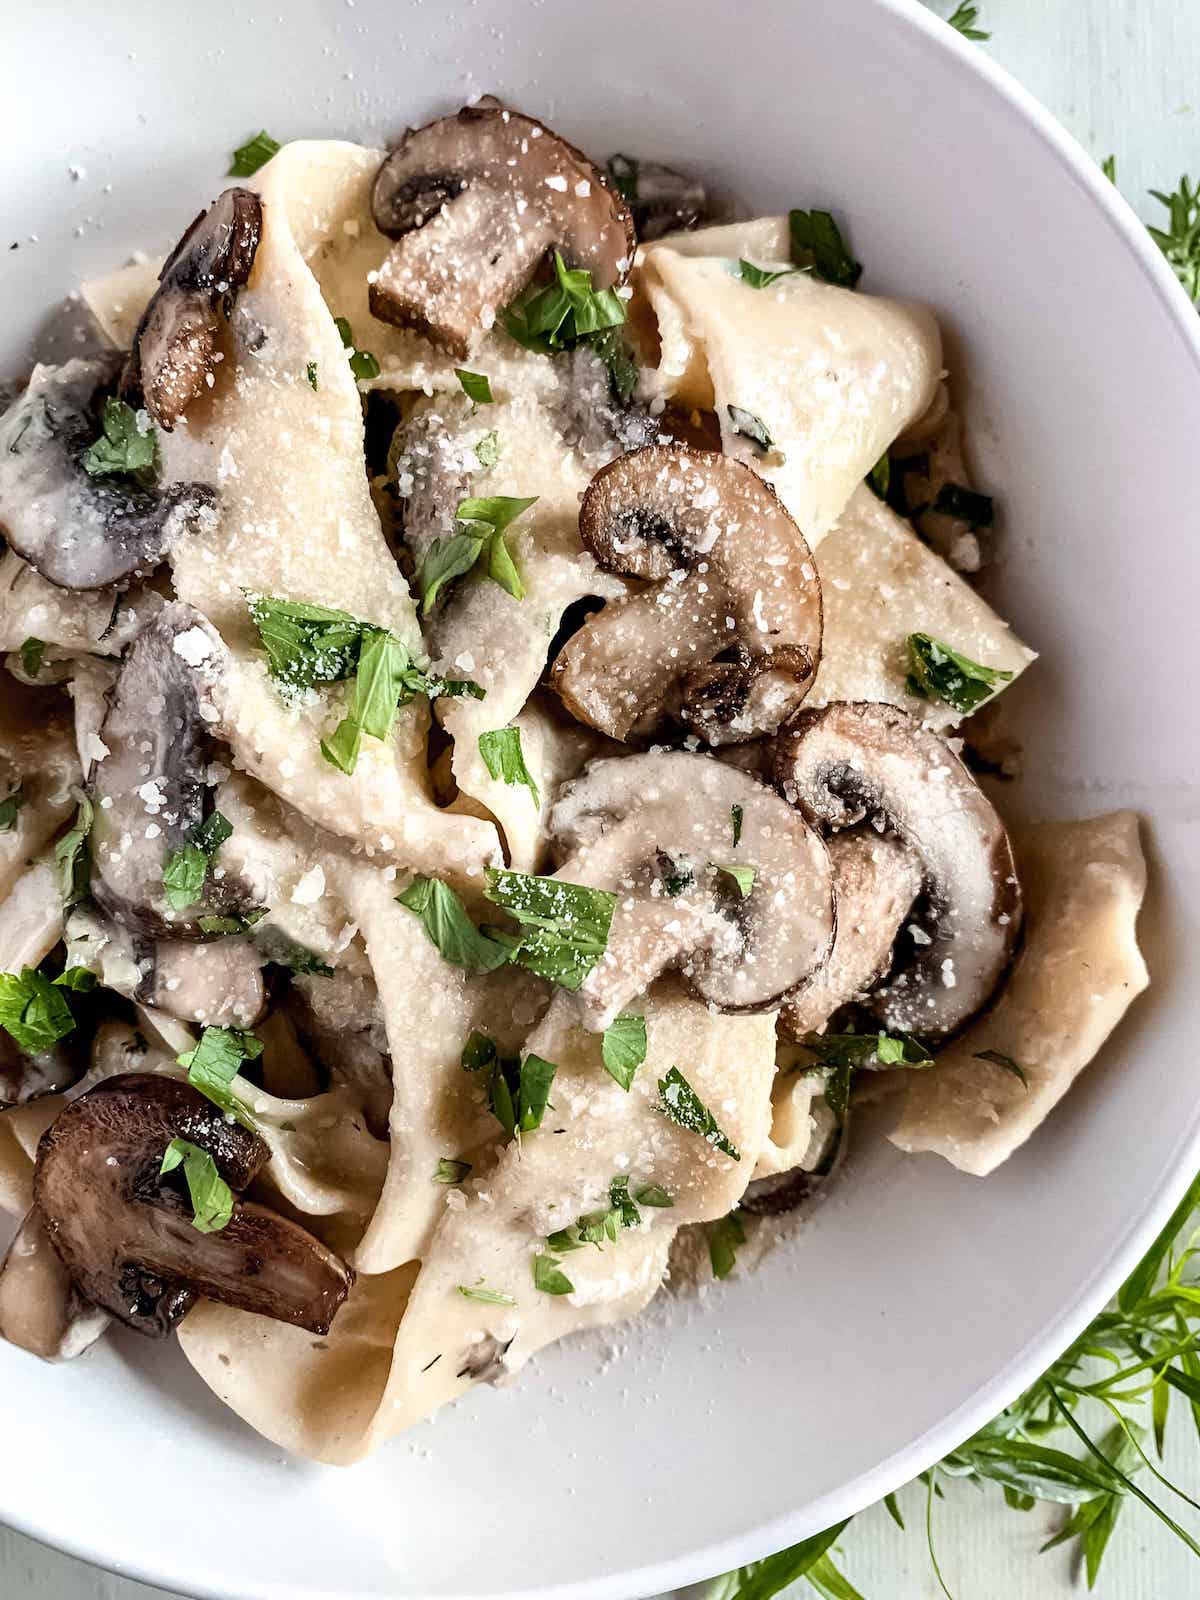 Pappardelle pasta with mushrooms in creamy garlic parmesan sauce topped with fresh herbs in a white bowl.